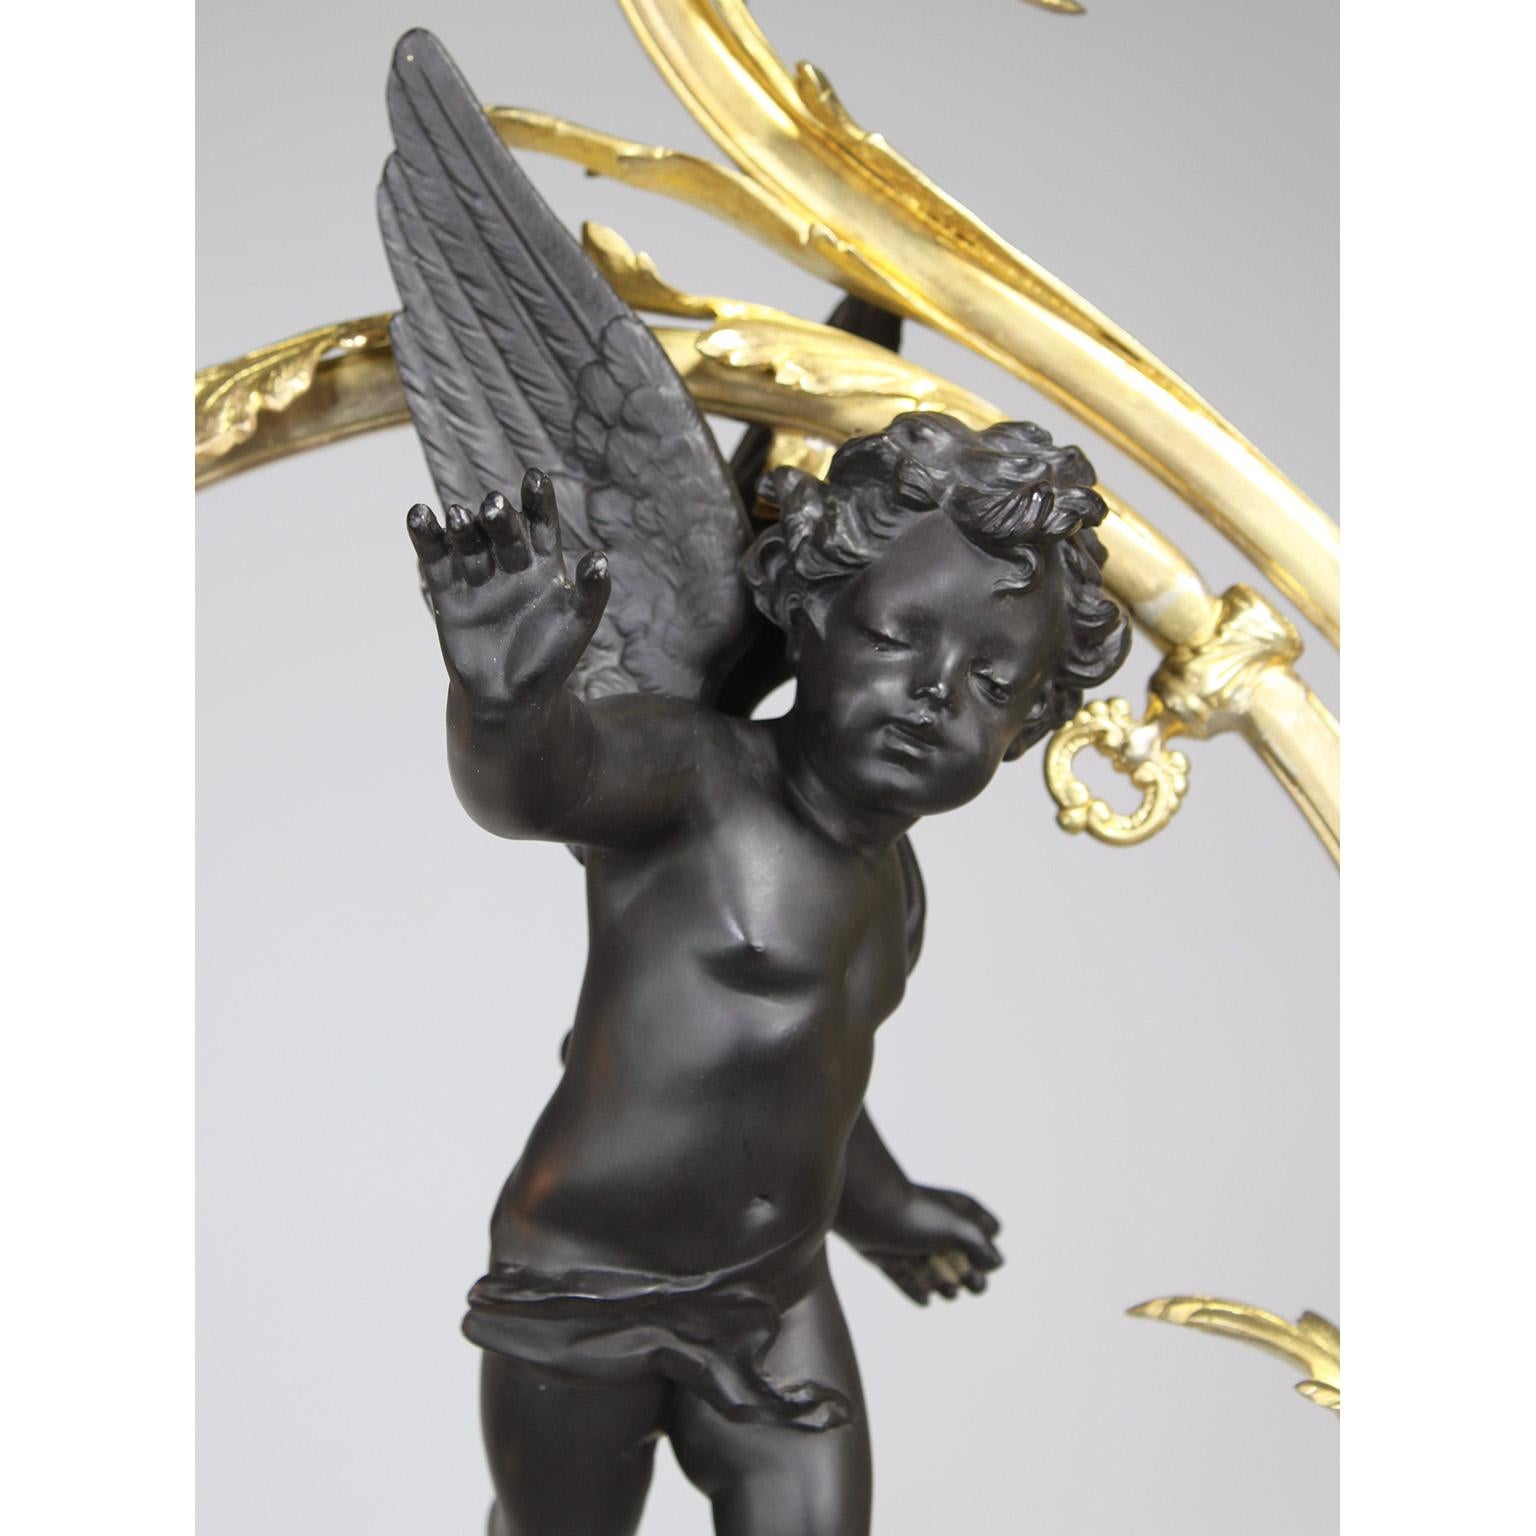 Whimsical French Belle Époque Gilt Bronze Cherub Gasolier Pendant Chandelier In Good Condition For Sale In Los Angeles, CA